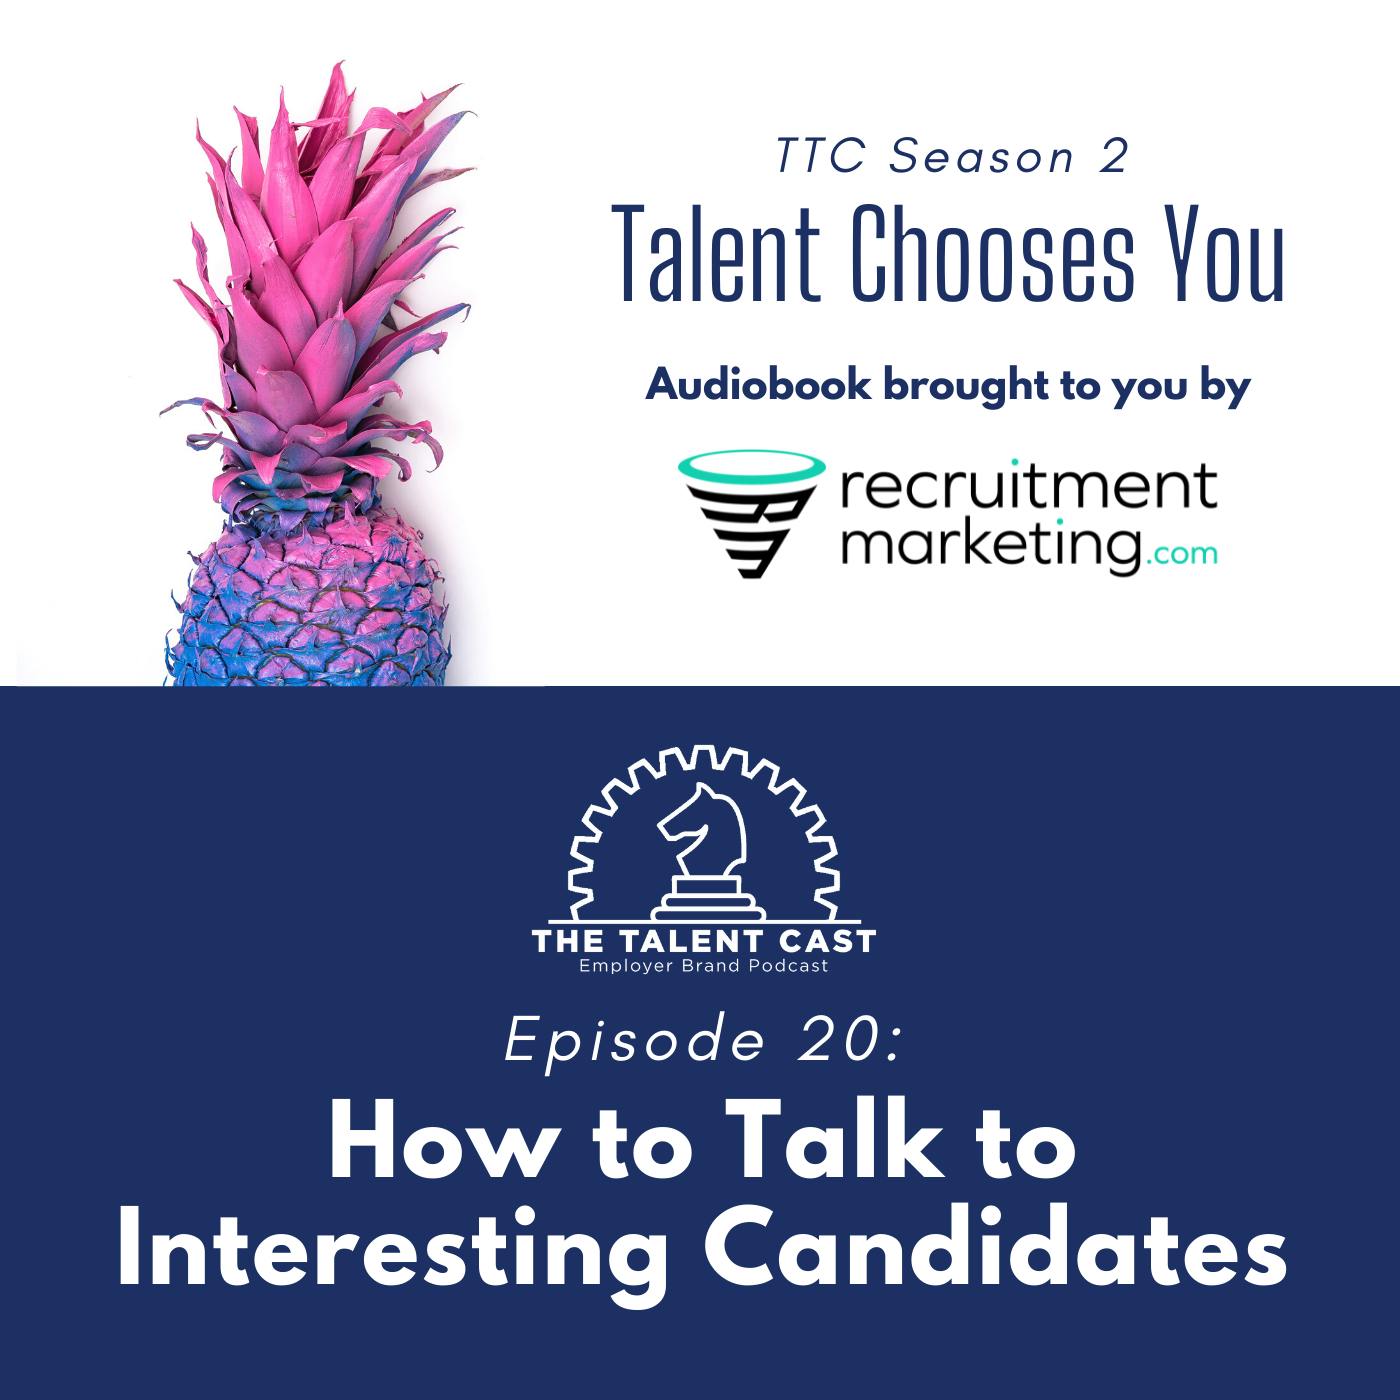 How to Talk to Interesting Candidates